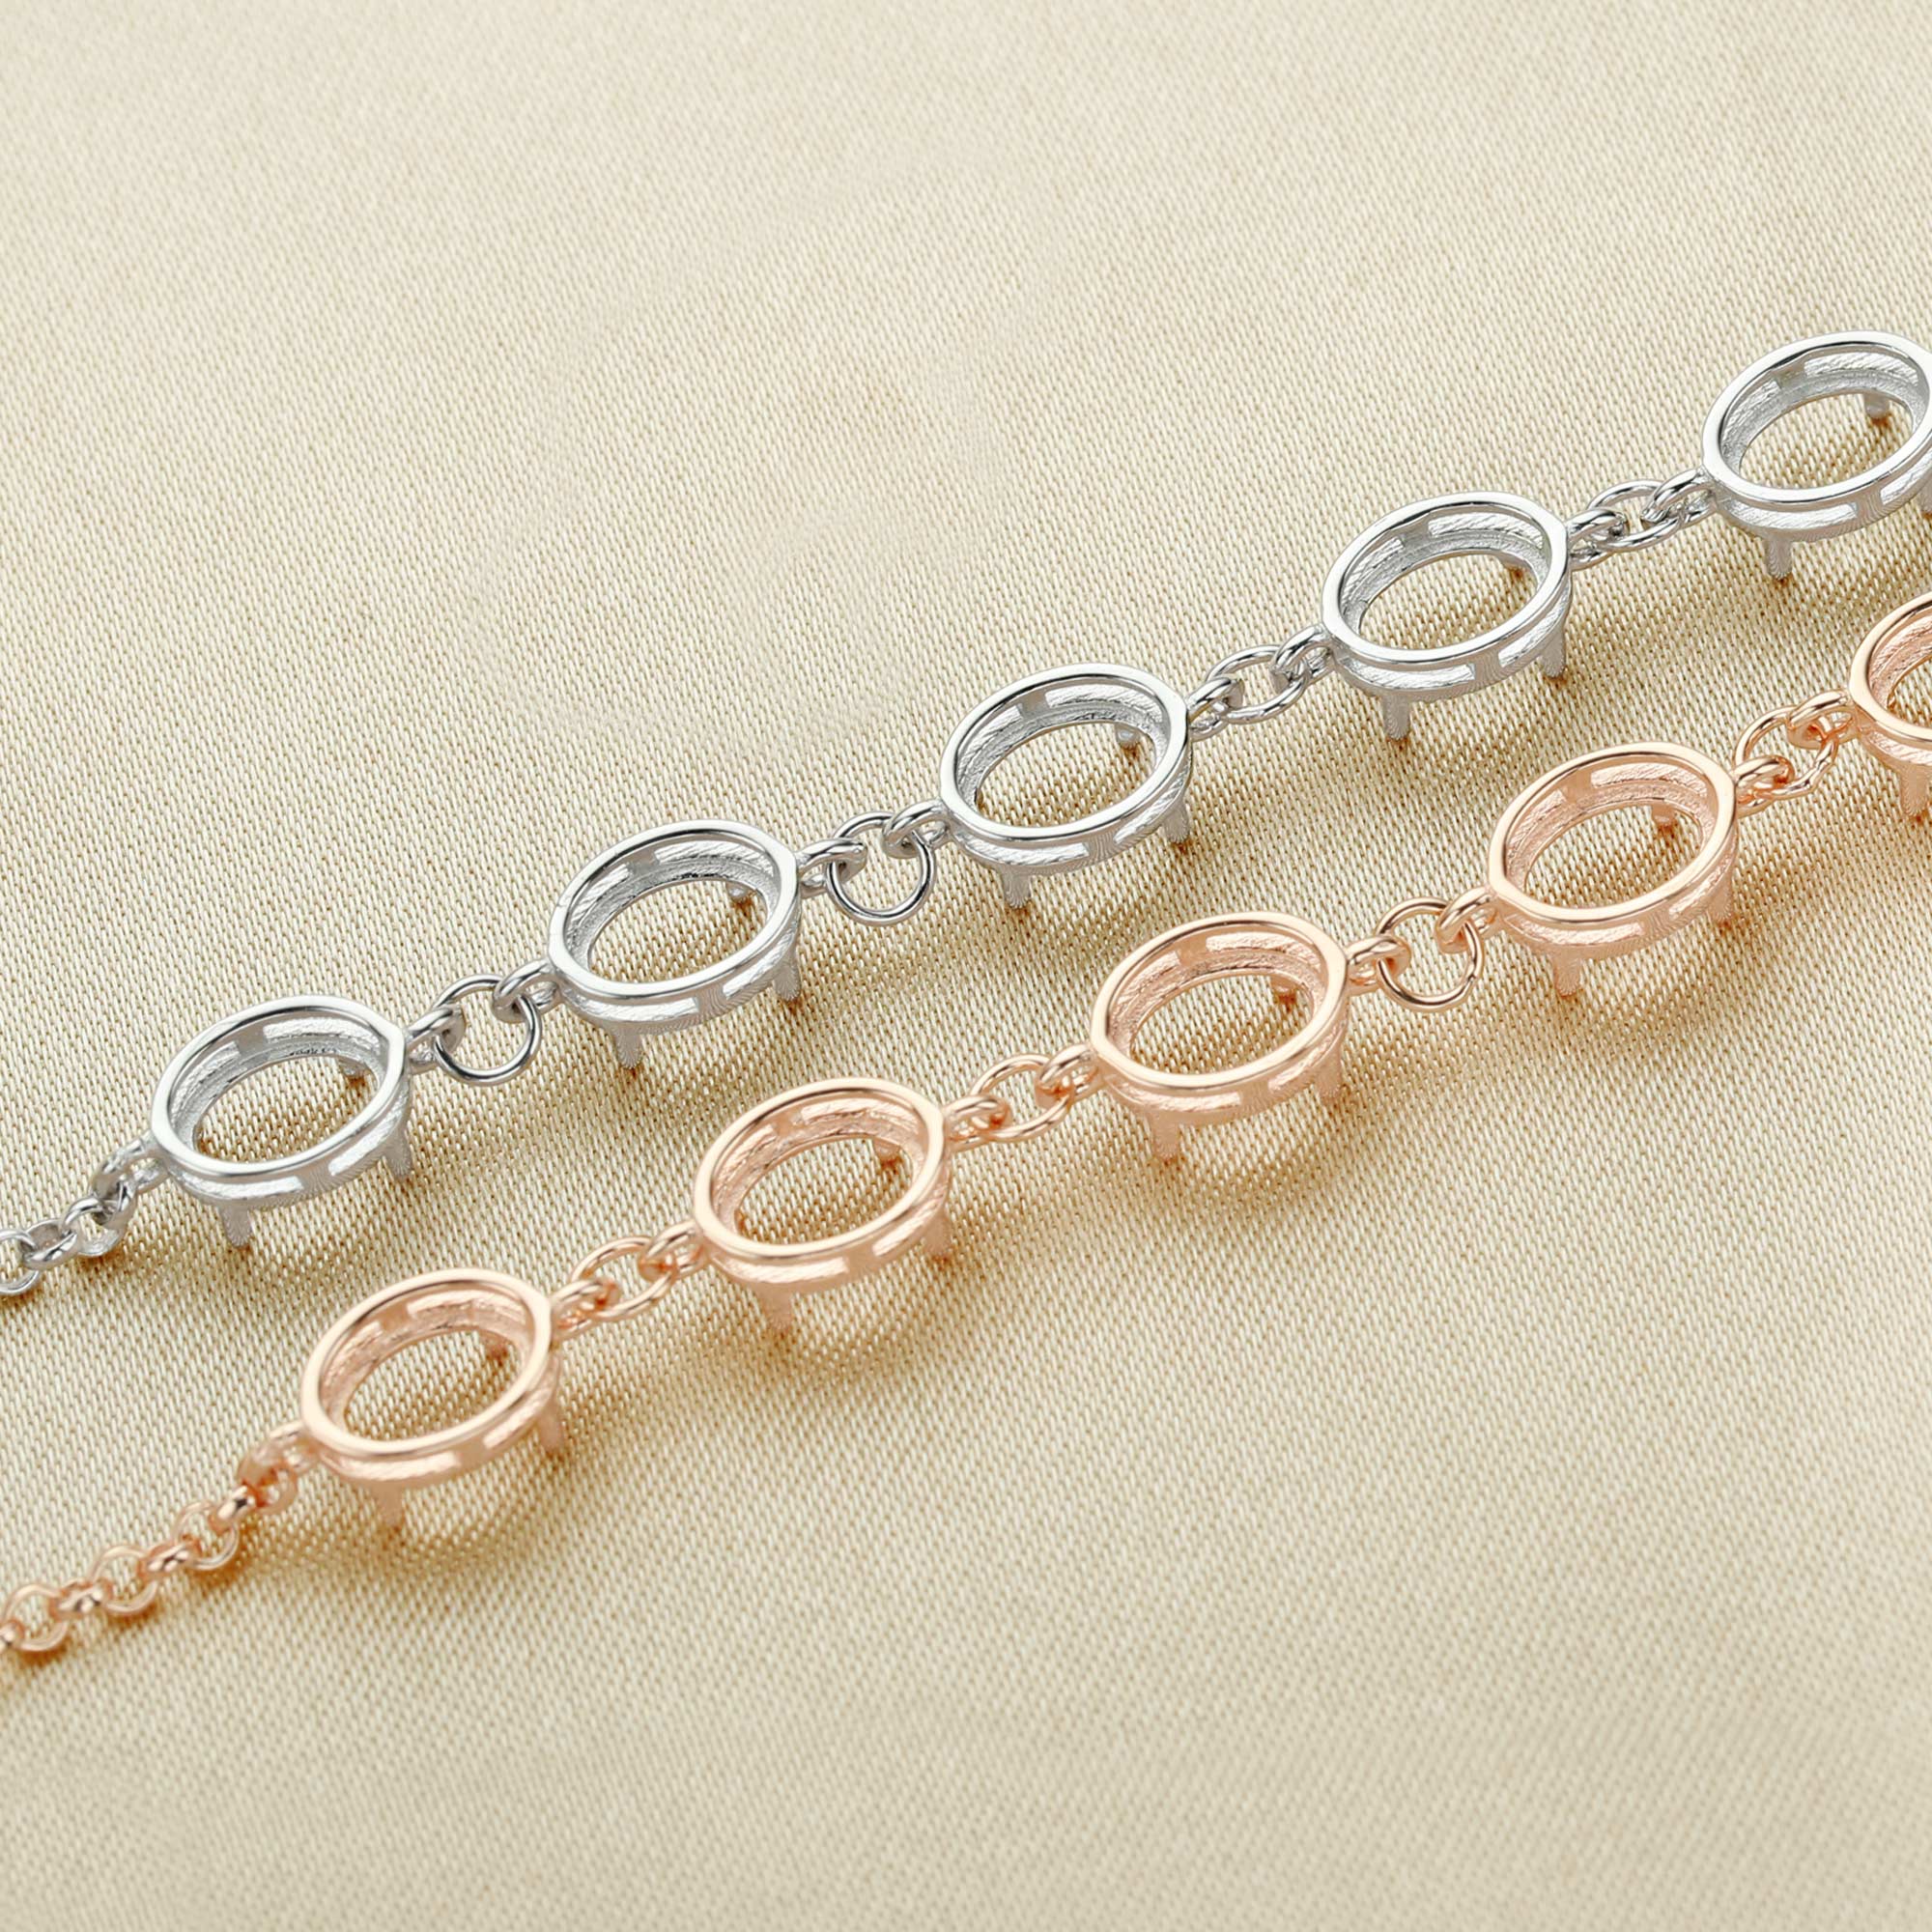 4x6MM 8 Stone Oval Prong Bracelet Bezel Settings,Solid 925 Sterling Silver Rose Gold Plated Bracelet Bezel With Chain 5.9''+1.18' 1900275 - Click Image to Close